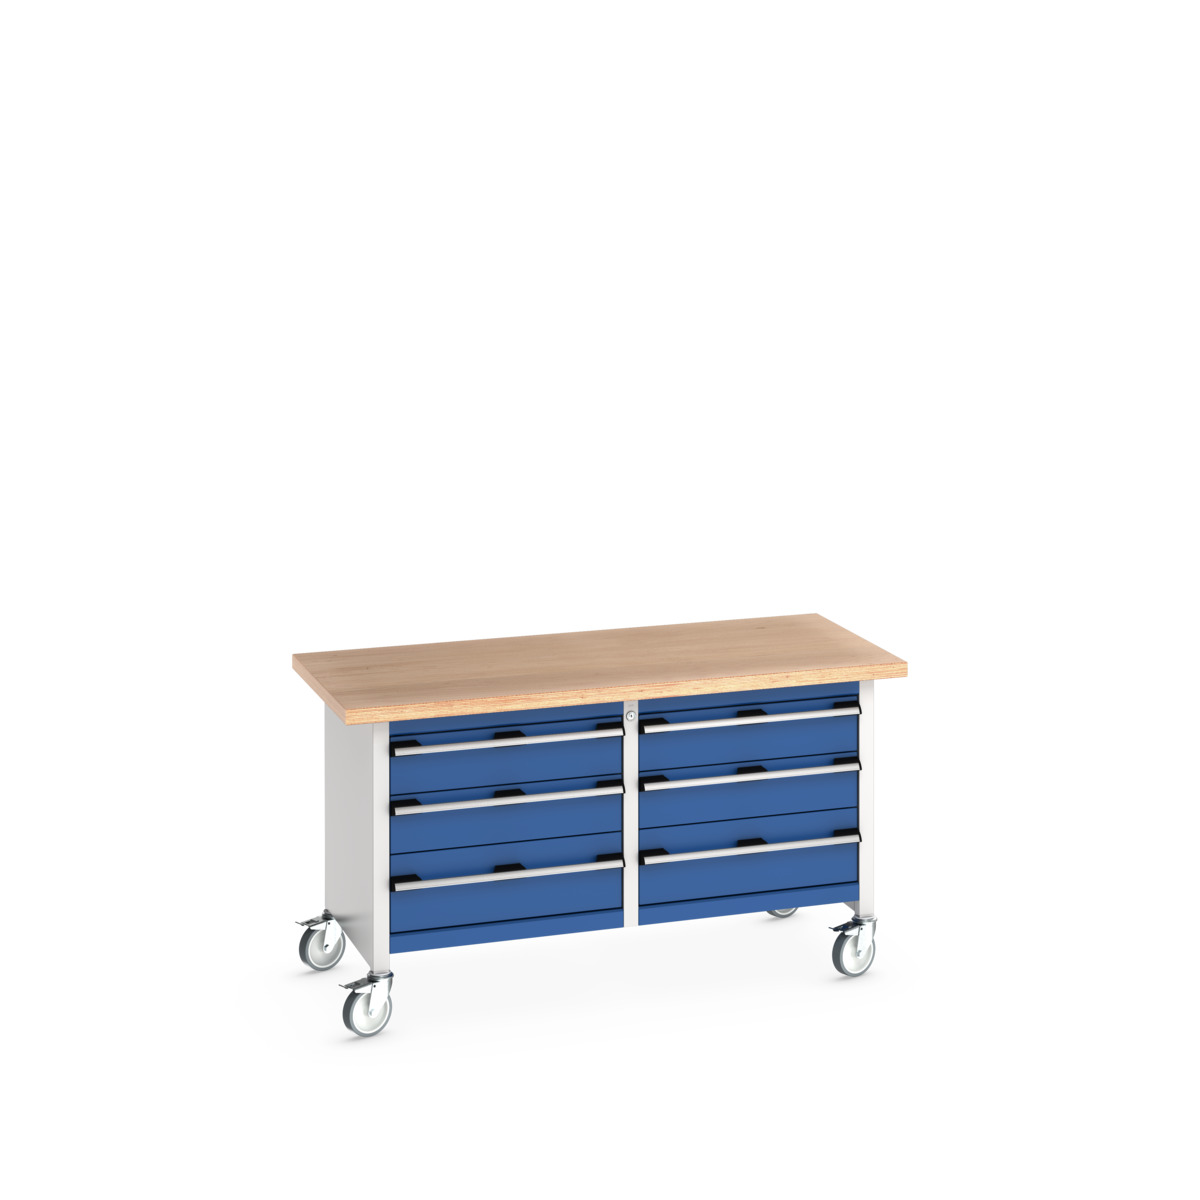 41002106.11V - cubio mobile storage bench (mpx)